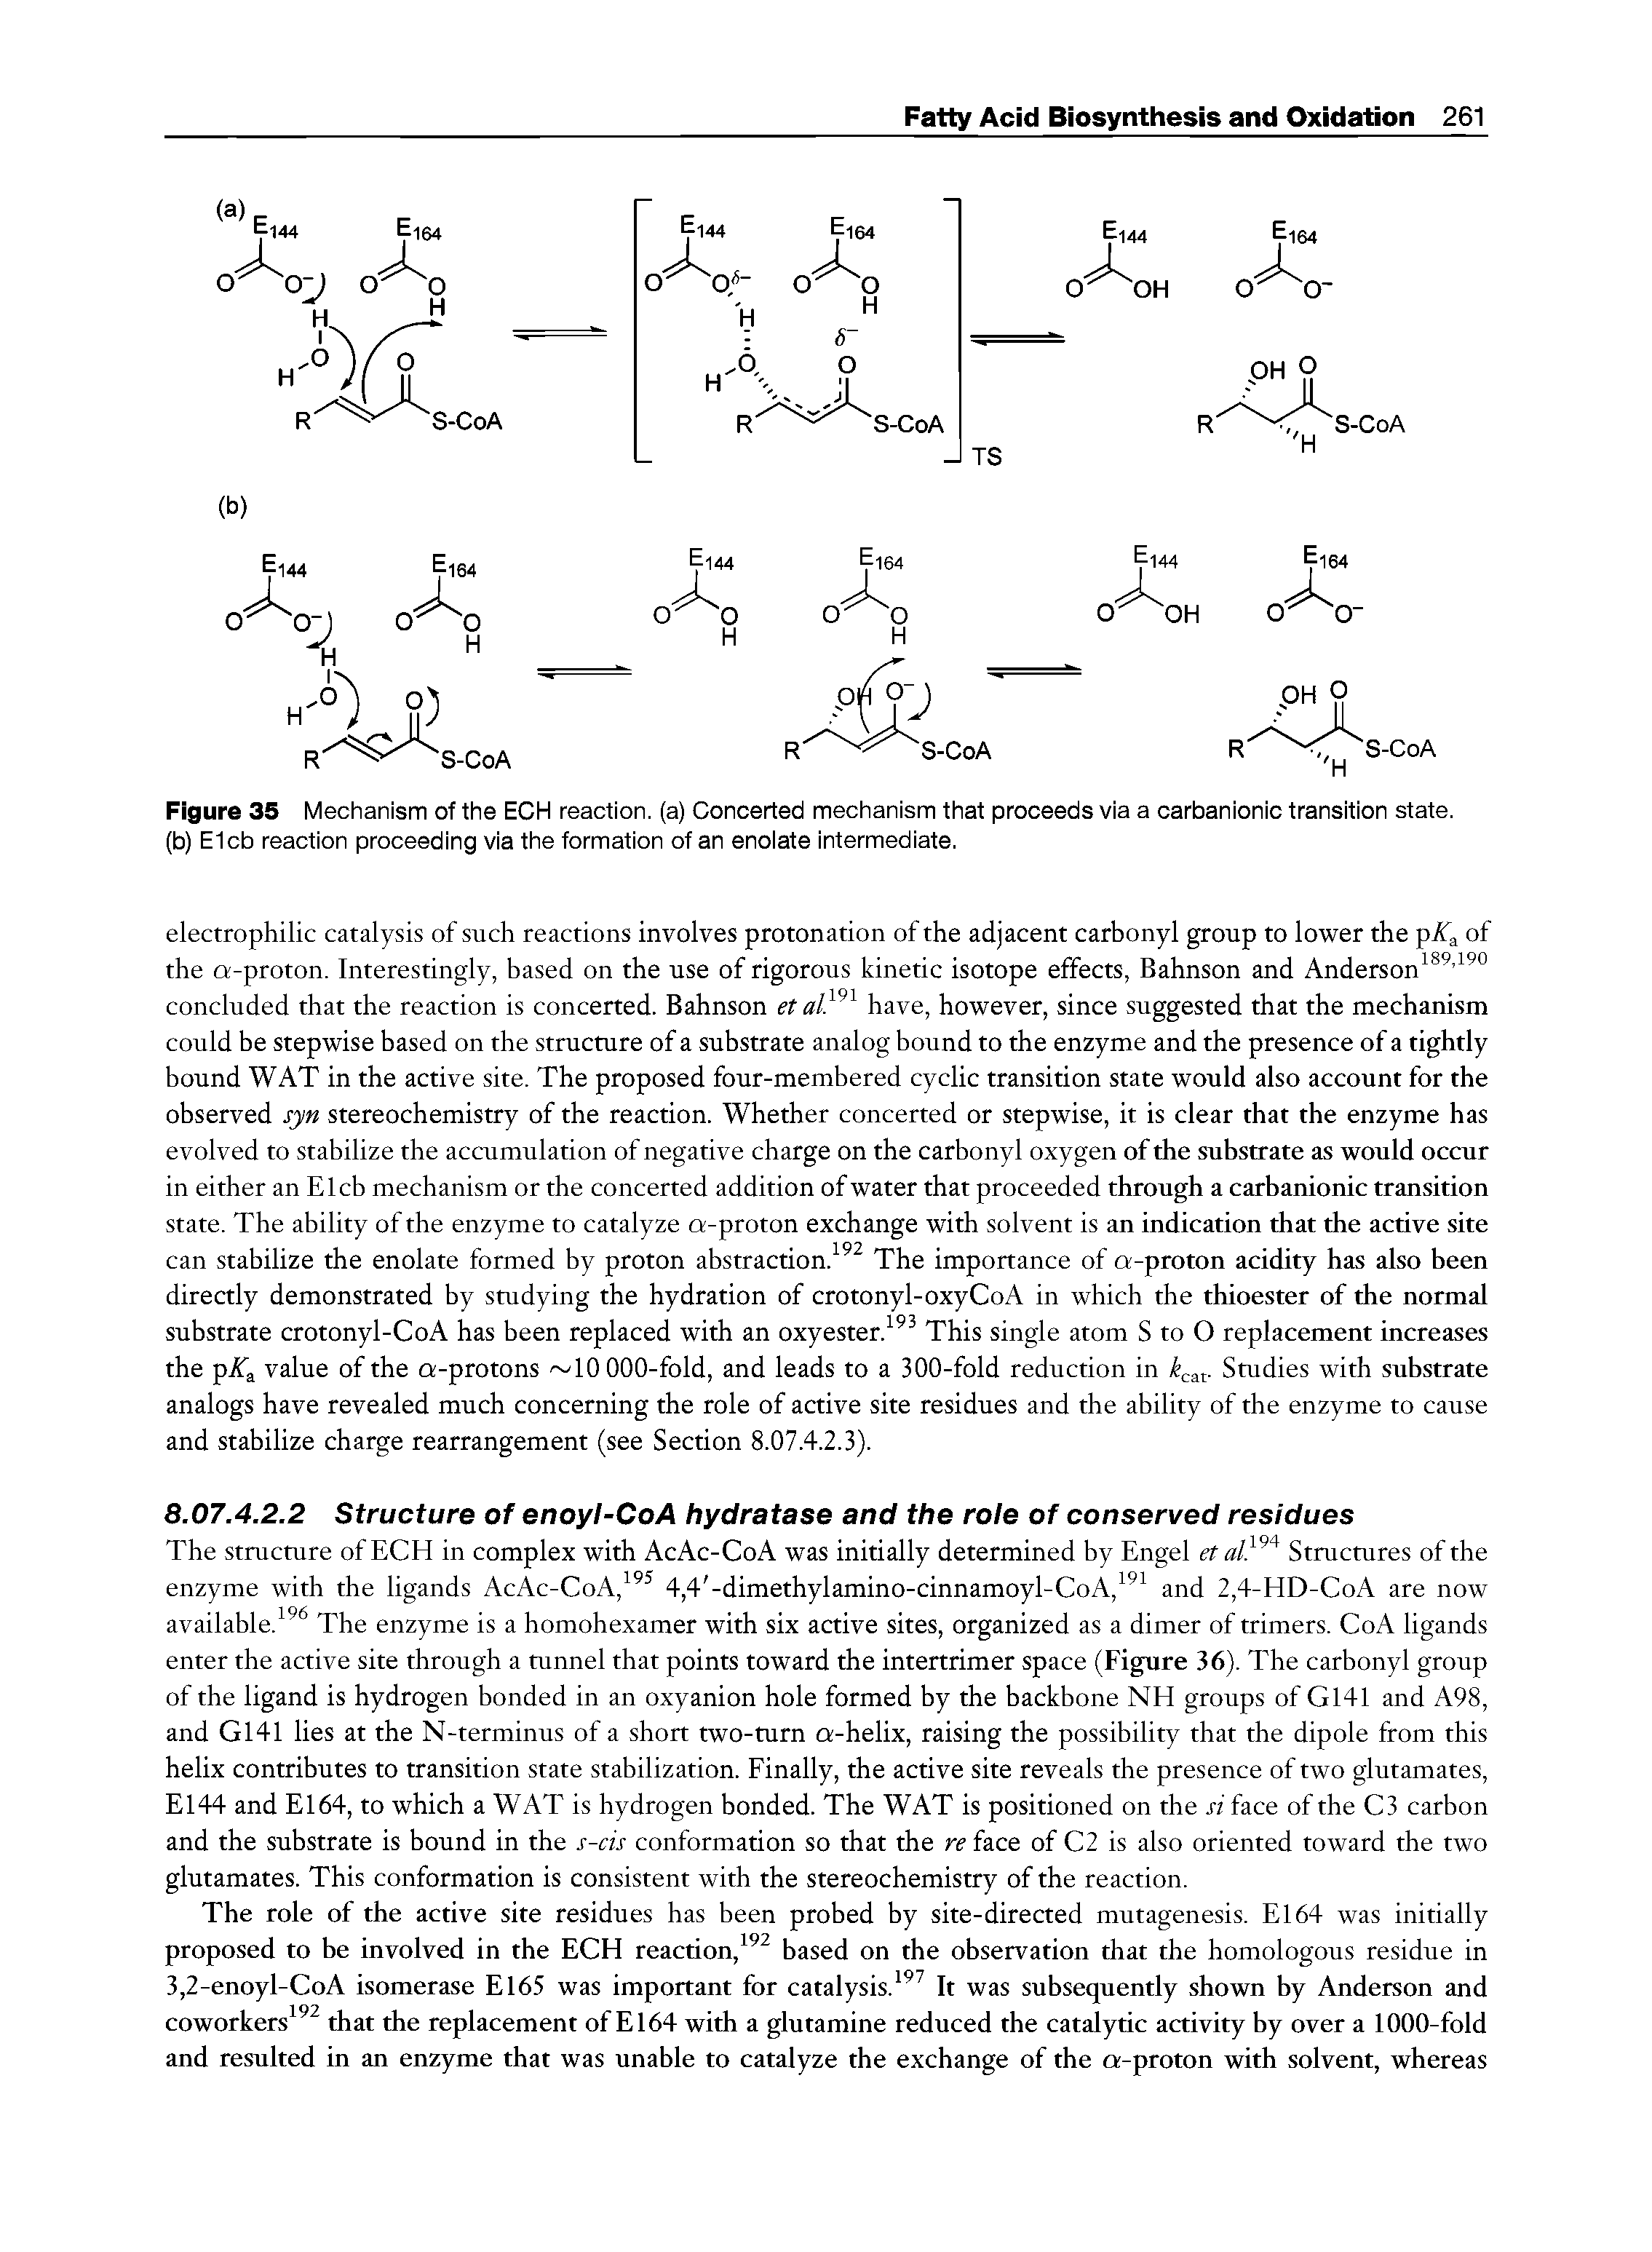 Figure 35 Mechanism of the ECH reaction, (a) Concerted mechanism that proceeds via a carbanionic transition state, (b) Elcb reaction proceeding via the formation of an enoiate intermediate.